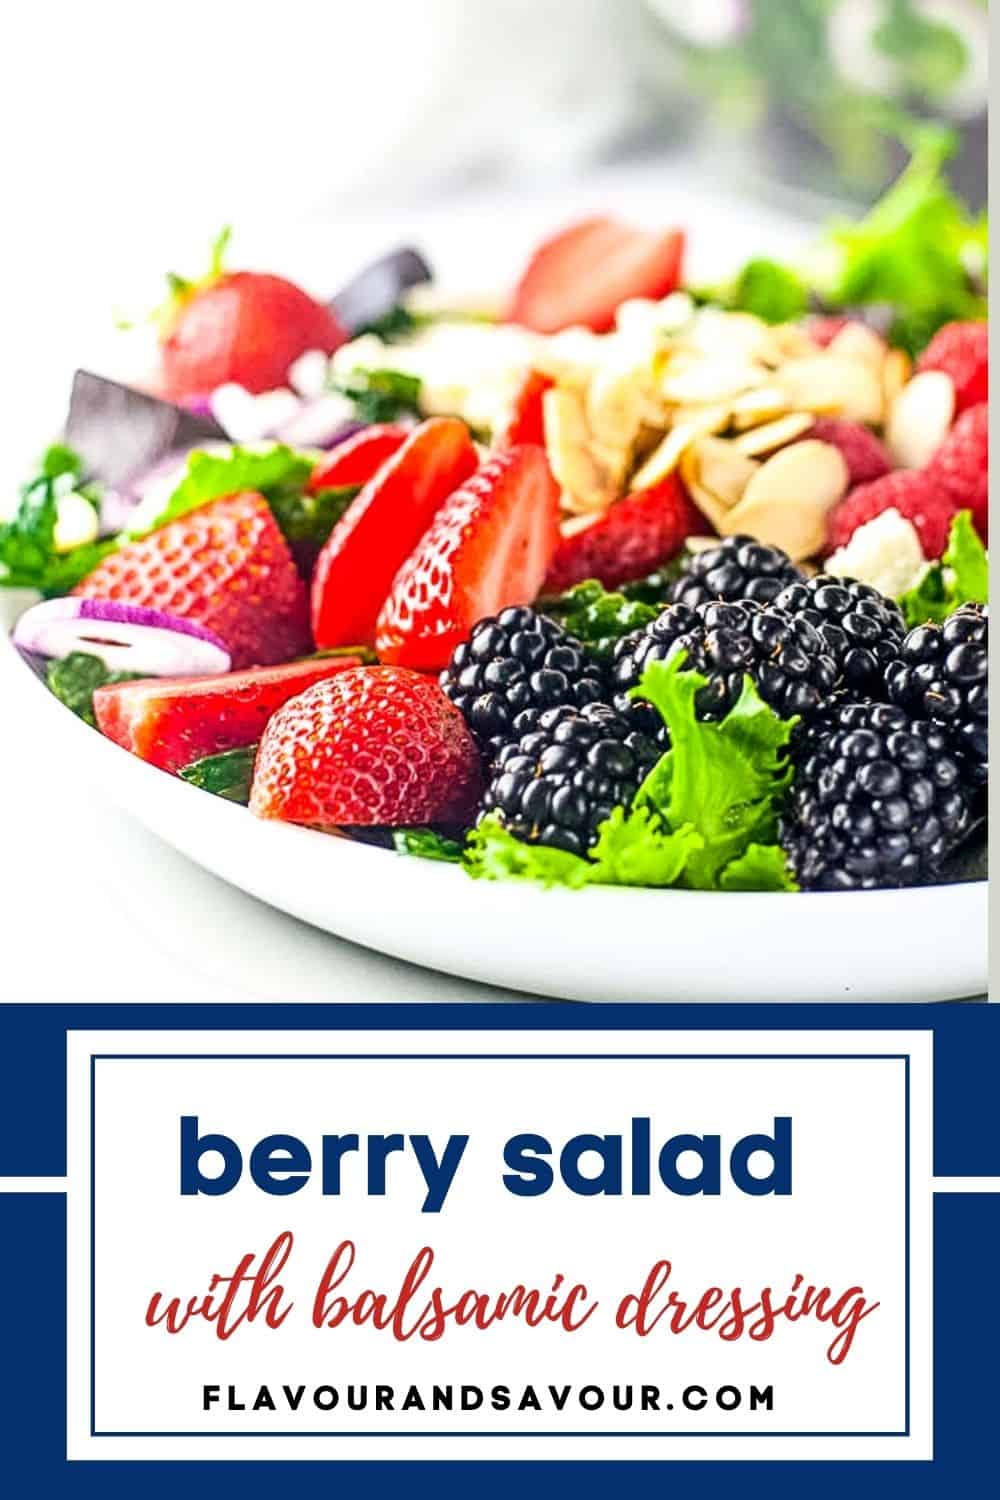 image with text for mixed green salad with berries.